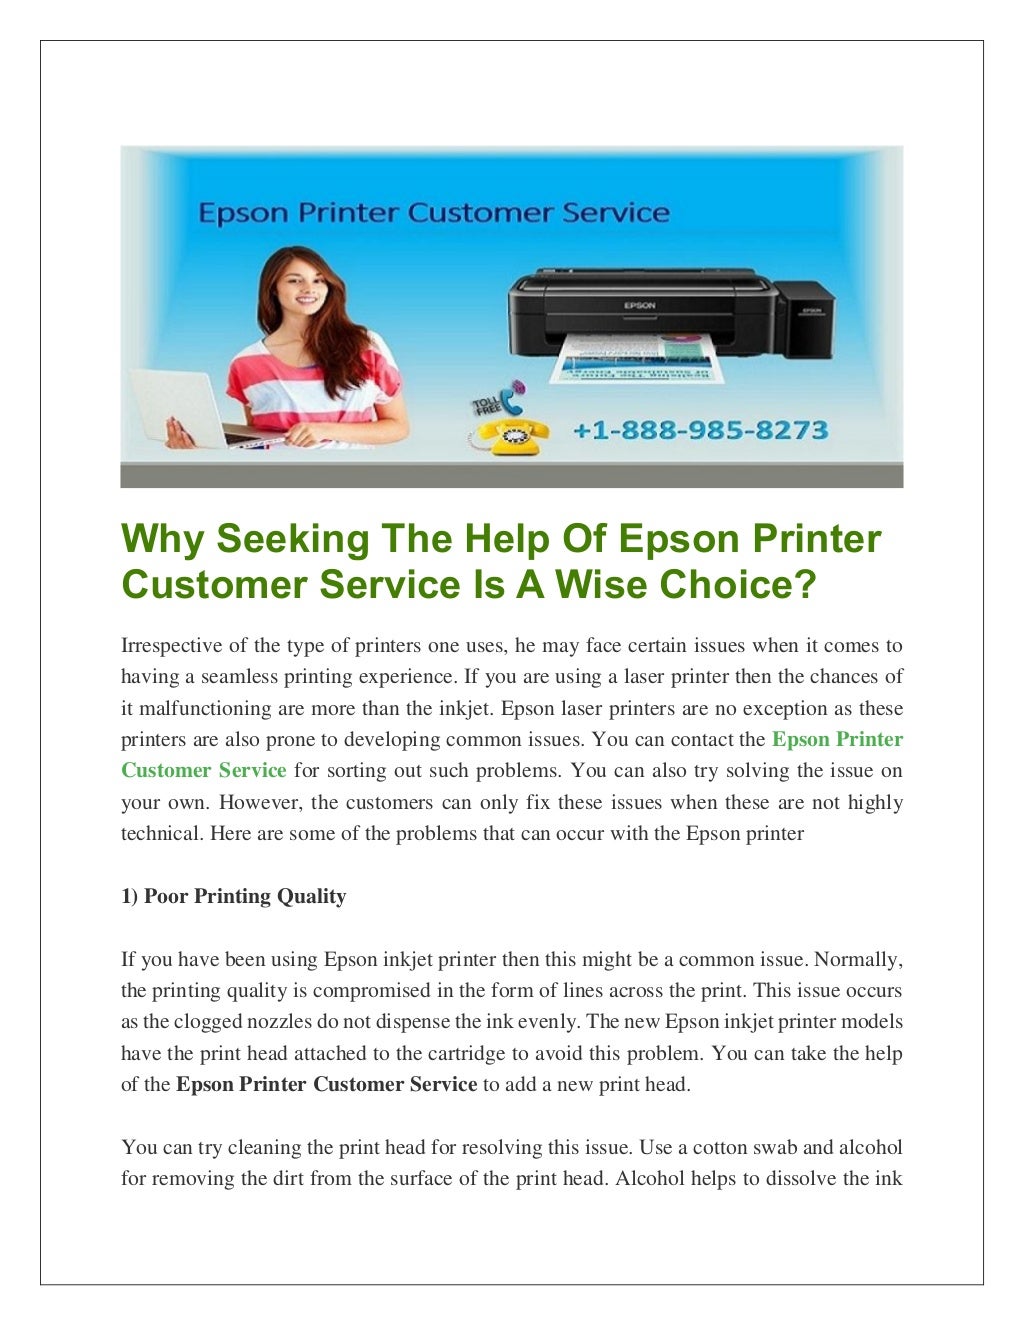 the-help-of-epson-printer-customer-service-is-a-wise-choice